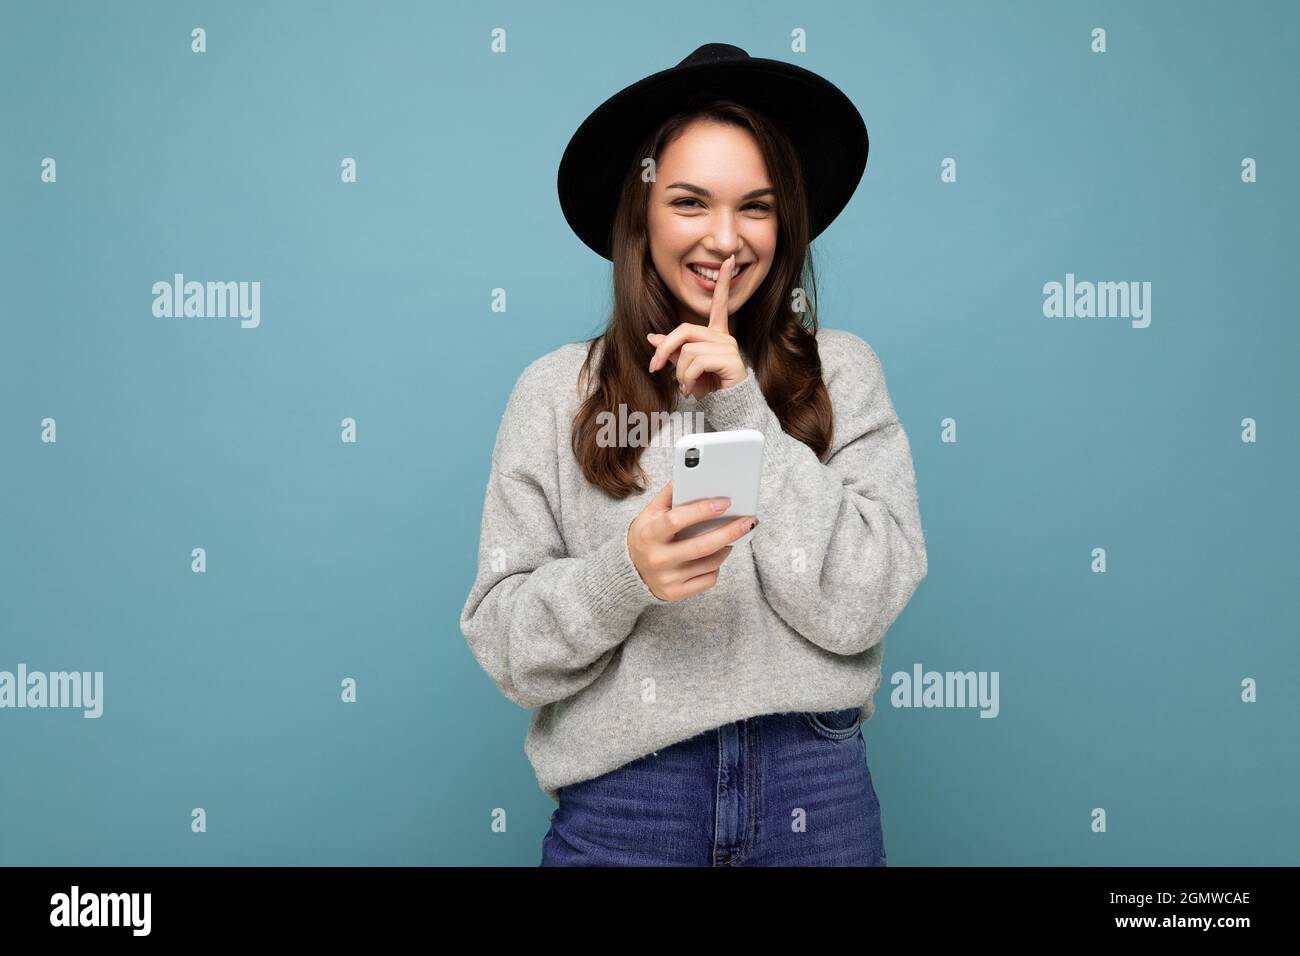 Attractive young smiling woman wearing black hat and grey sweater holding smartphone looking at camera showing shhh gesture isolated on background Stock Photo